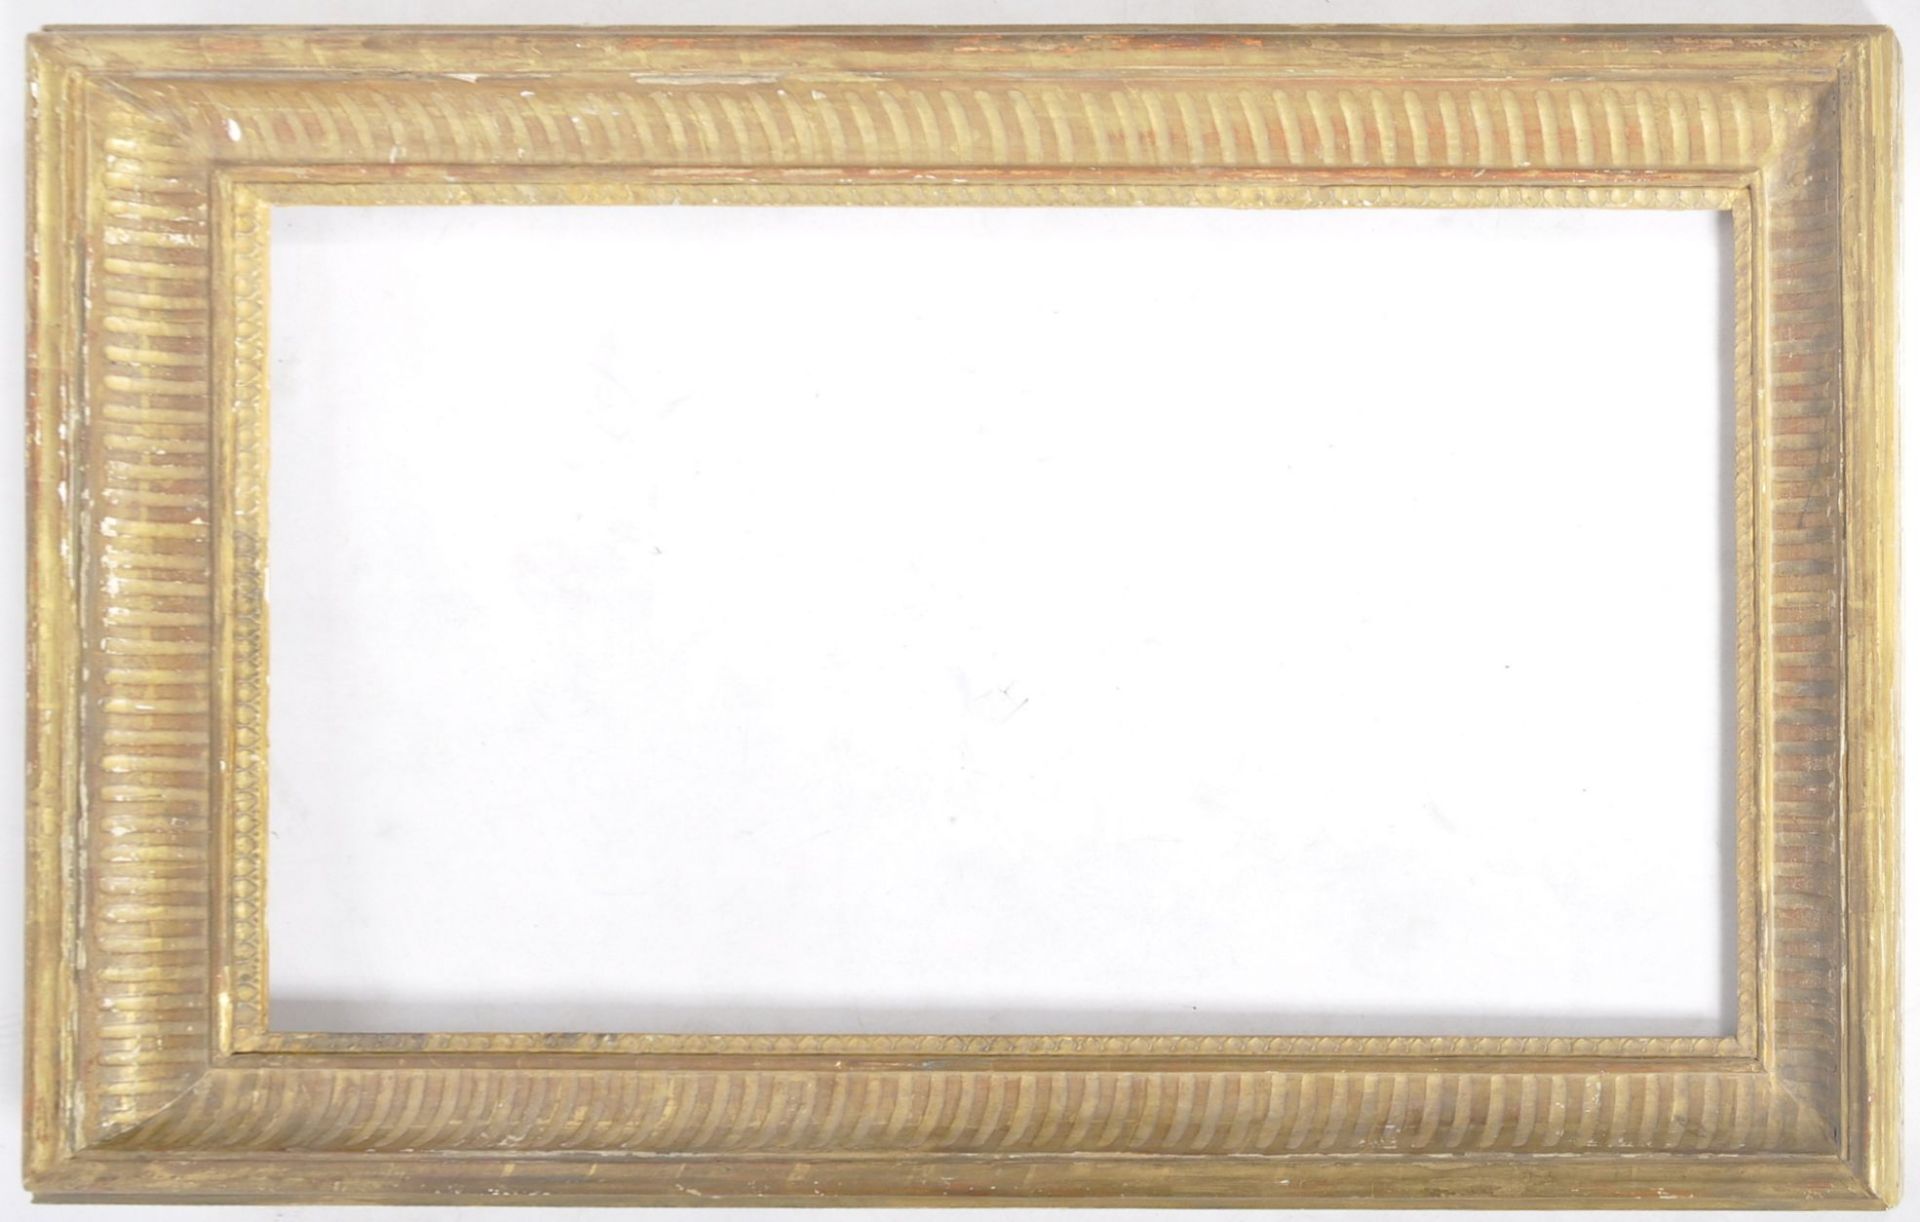 MATCHING PAIR OF VICTORIAN GILT WOOD PICTURE FRAMES - Image 9 of 9